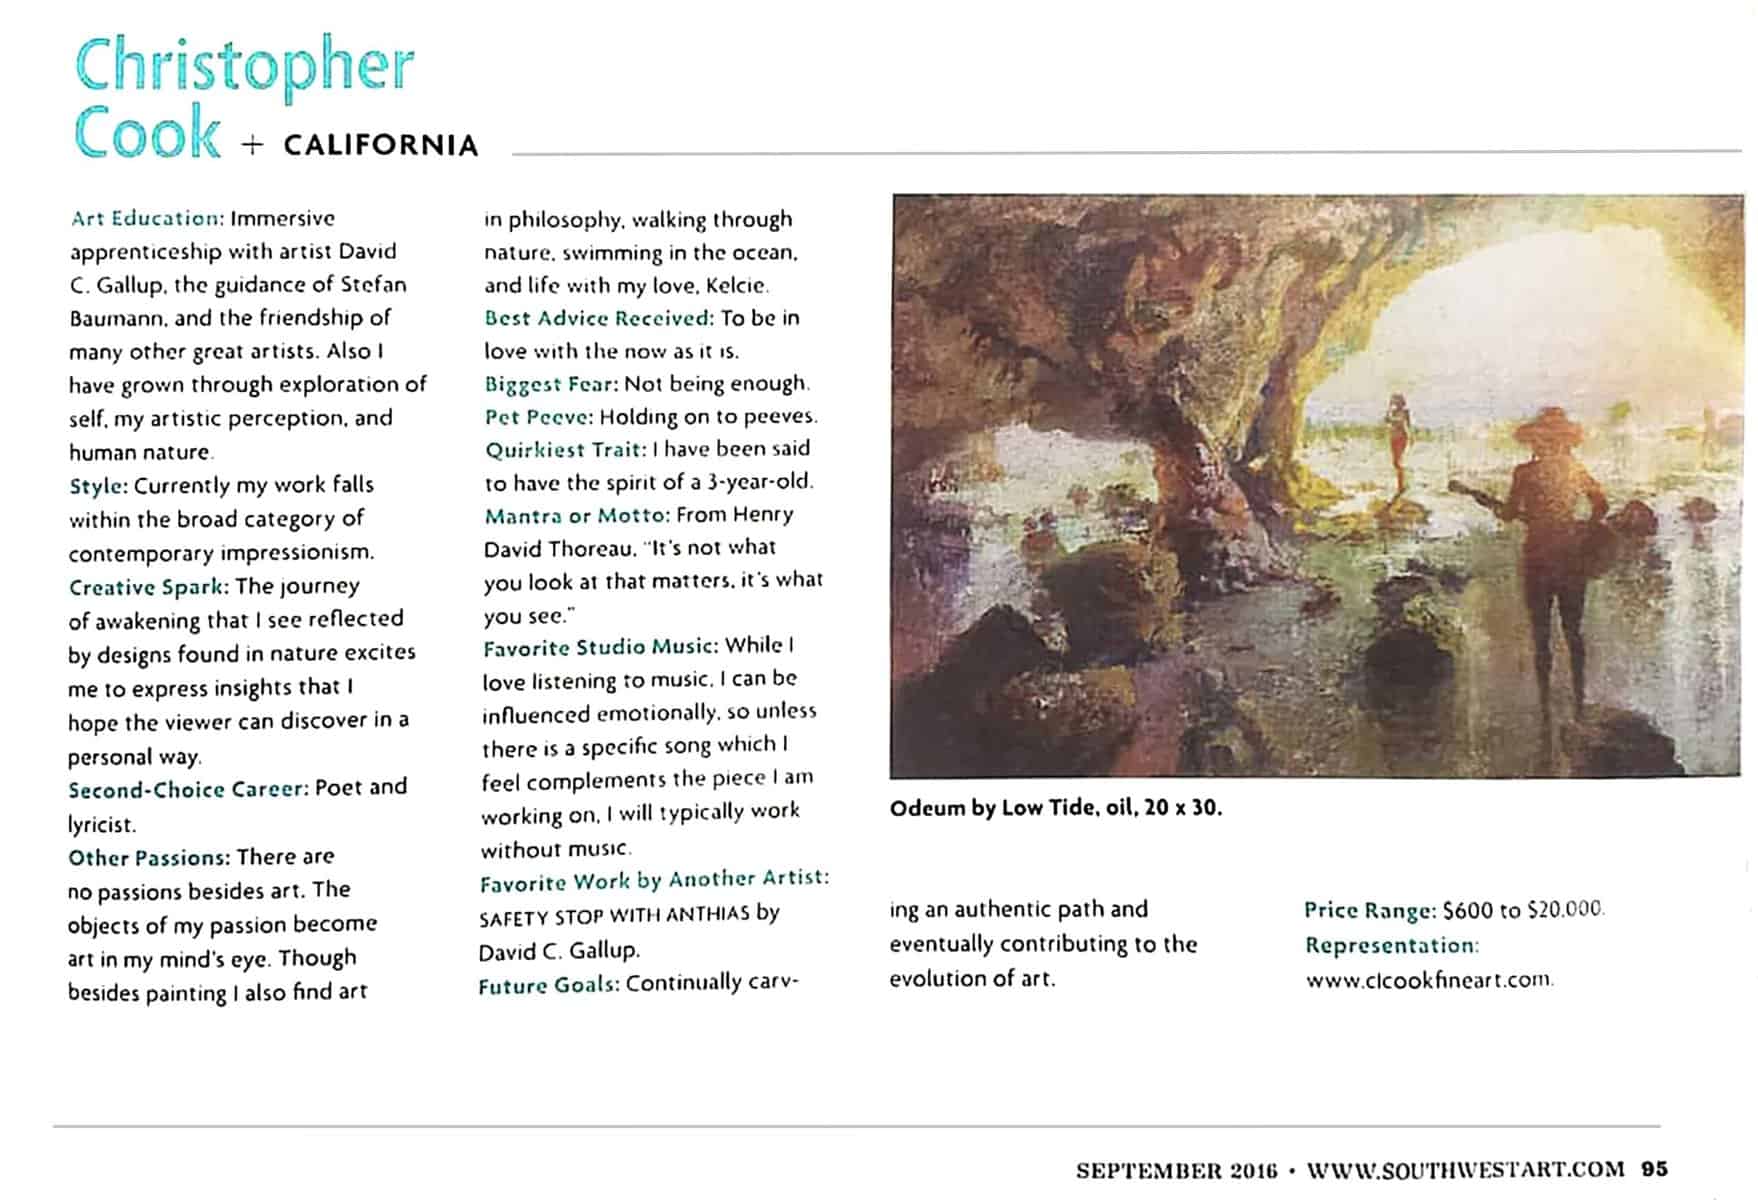 American Legacy Fine Arts presents Christopher Cook in Southwest Art Magazine September 2016.